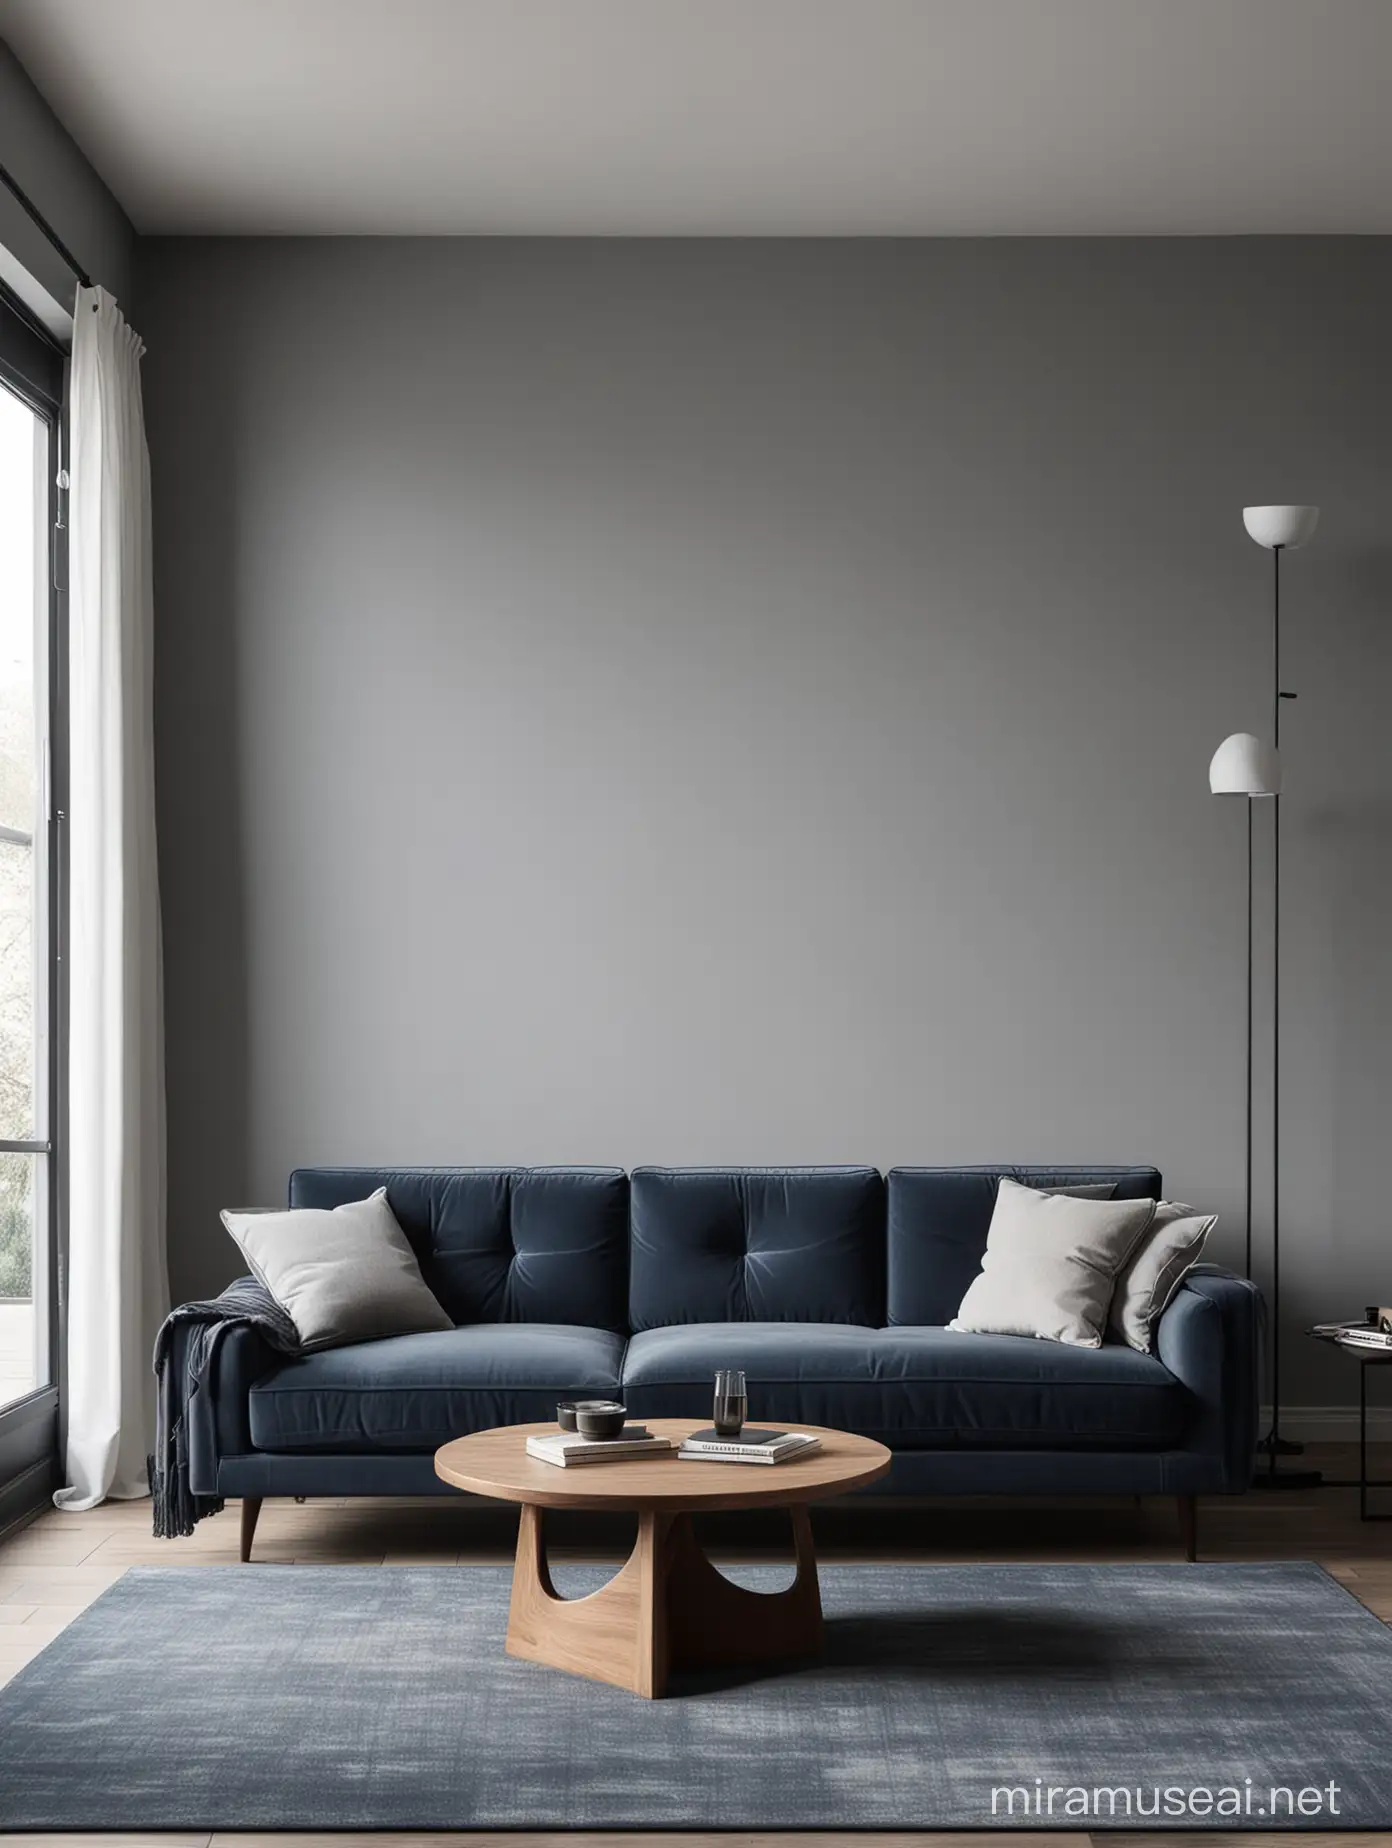 A minimalist living room featuring an dark blue couch, dark wooden floor, grey walls, grey accents, and sleek, modern furniture. Include subtle textures and clean lines, emphasizing simplicity and elegance.